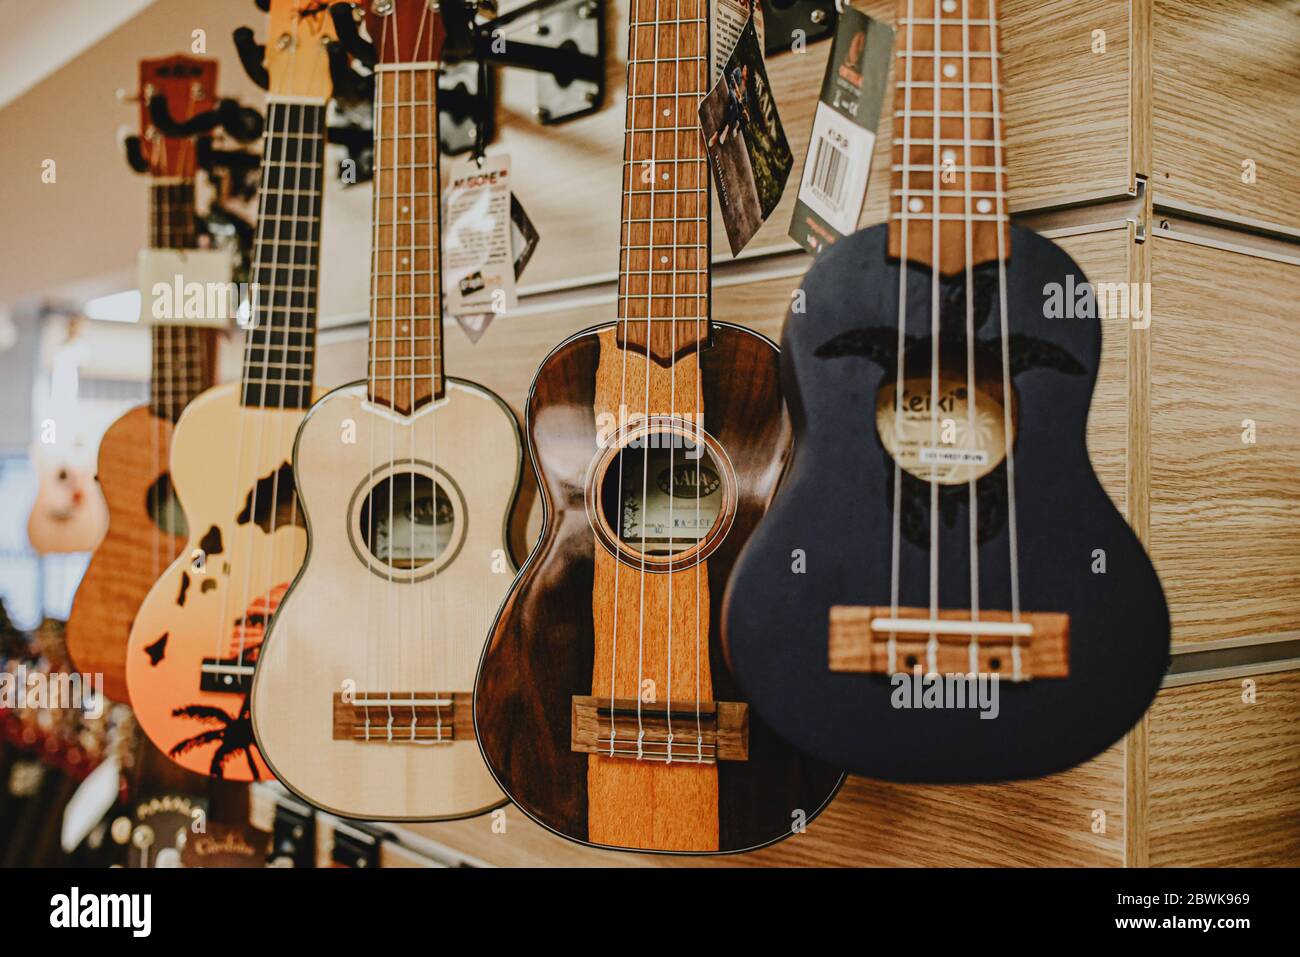 Istanbul Turkey 1 November 2019 variety a huge selection of acoustic guitars in the music store window Stock Photo